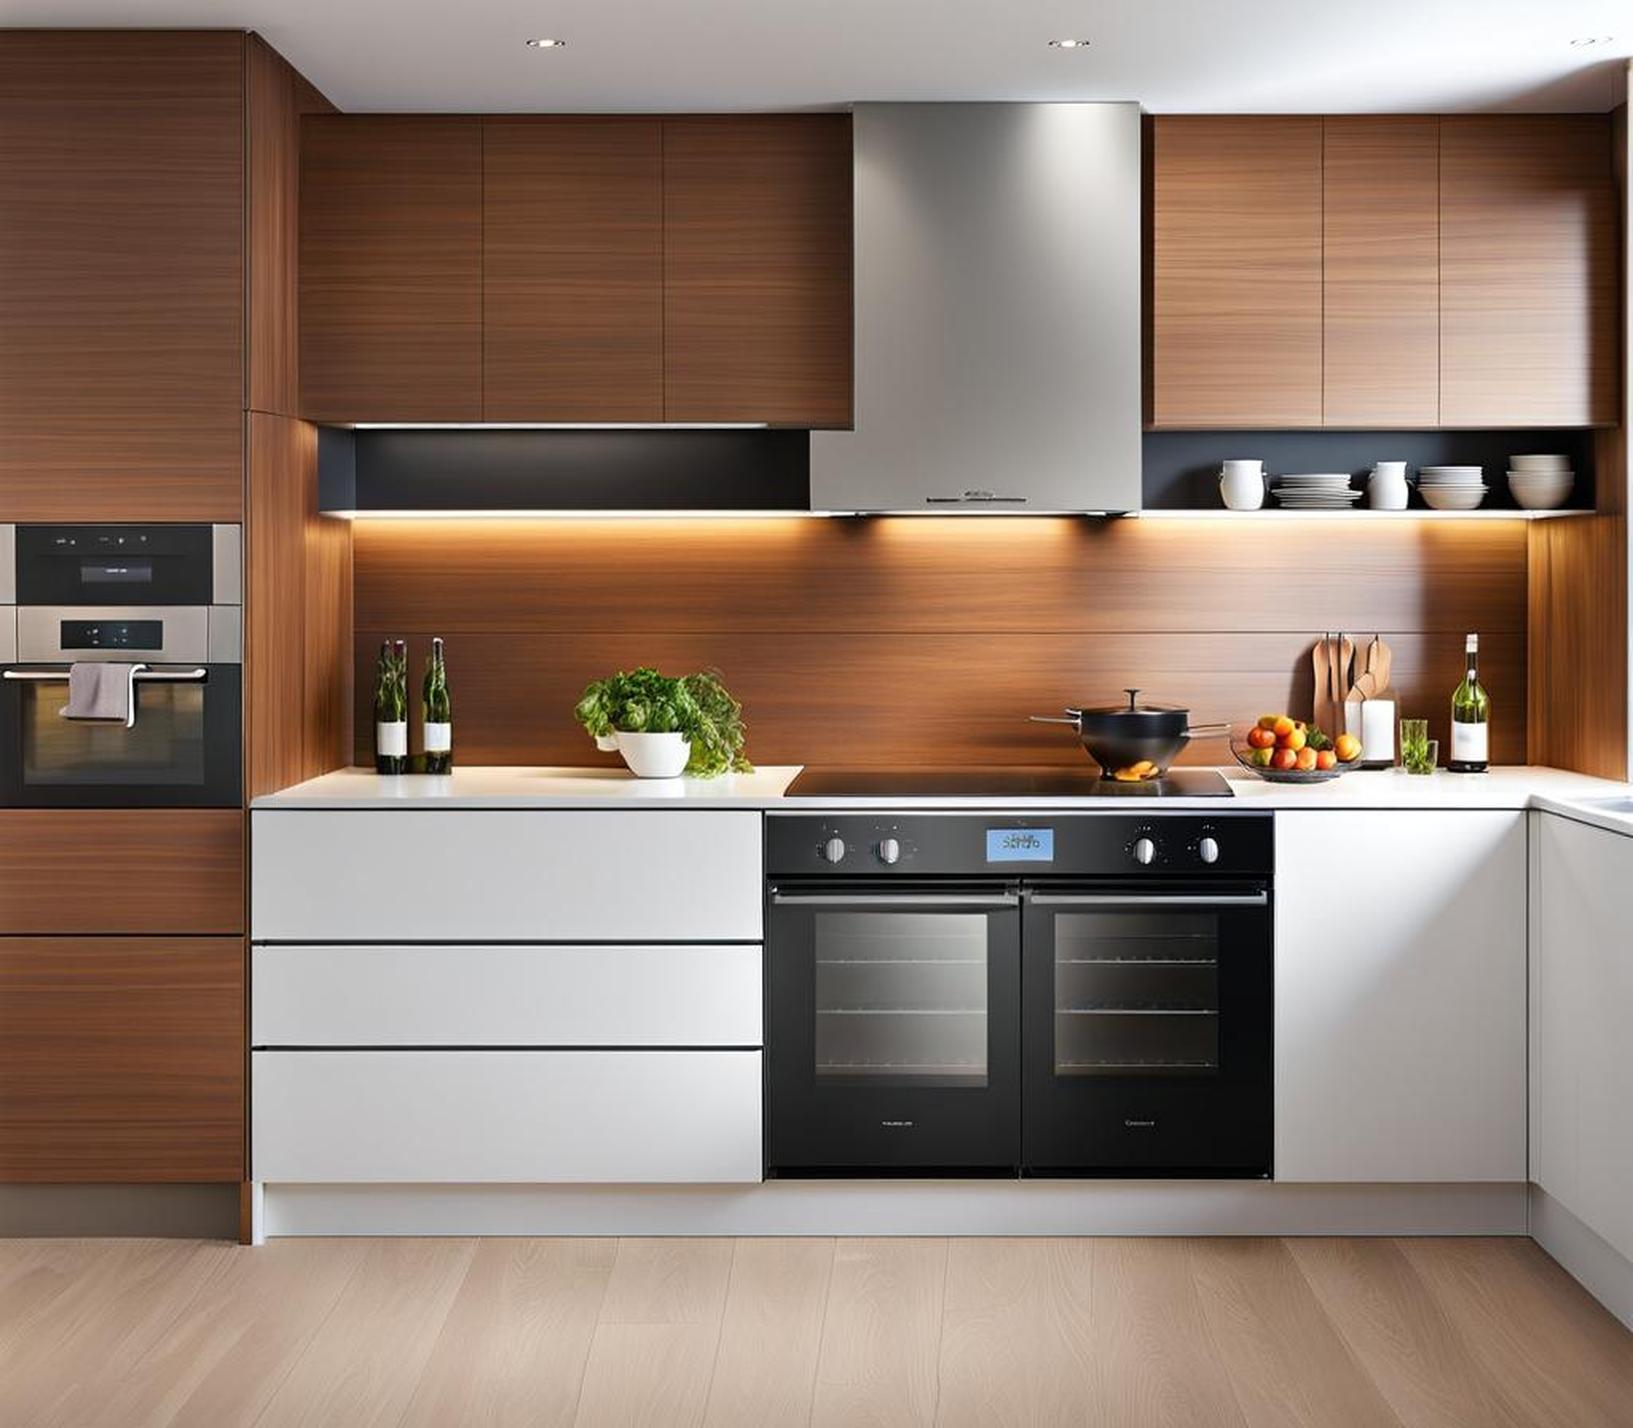 kitchen designs with wall ovens